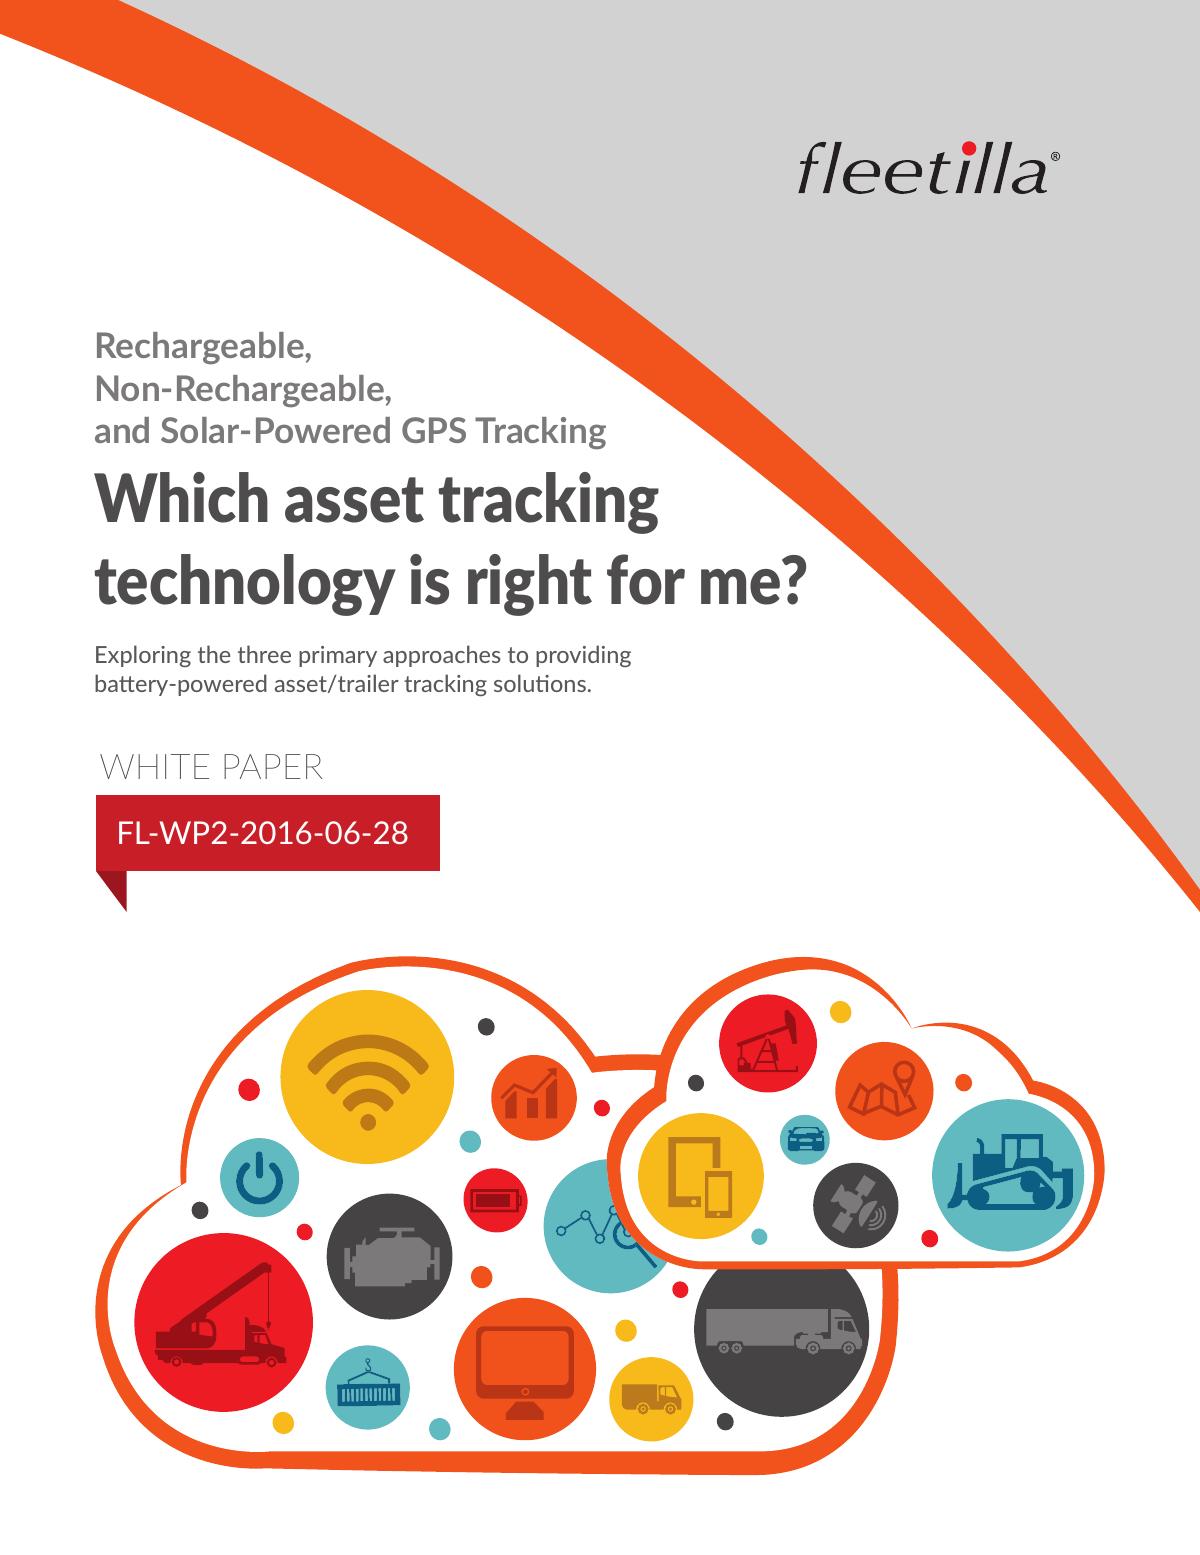 Which asset tracking technology is right for me?